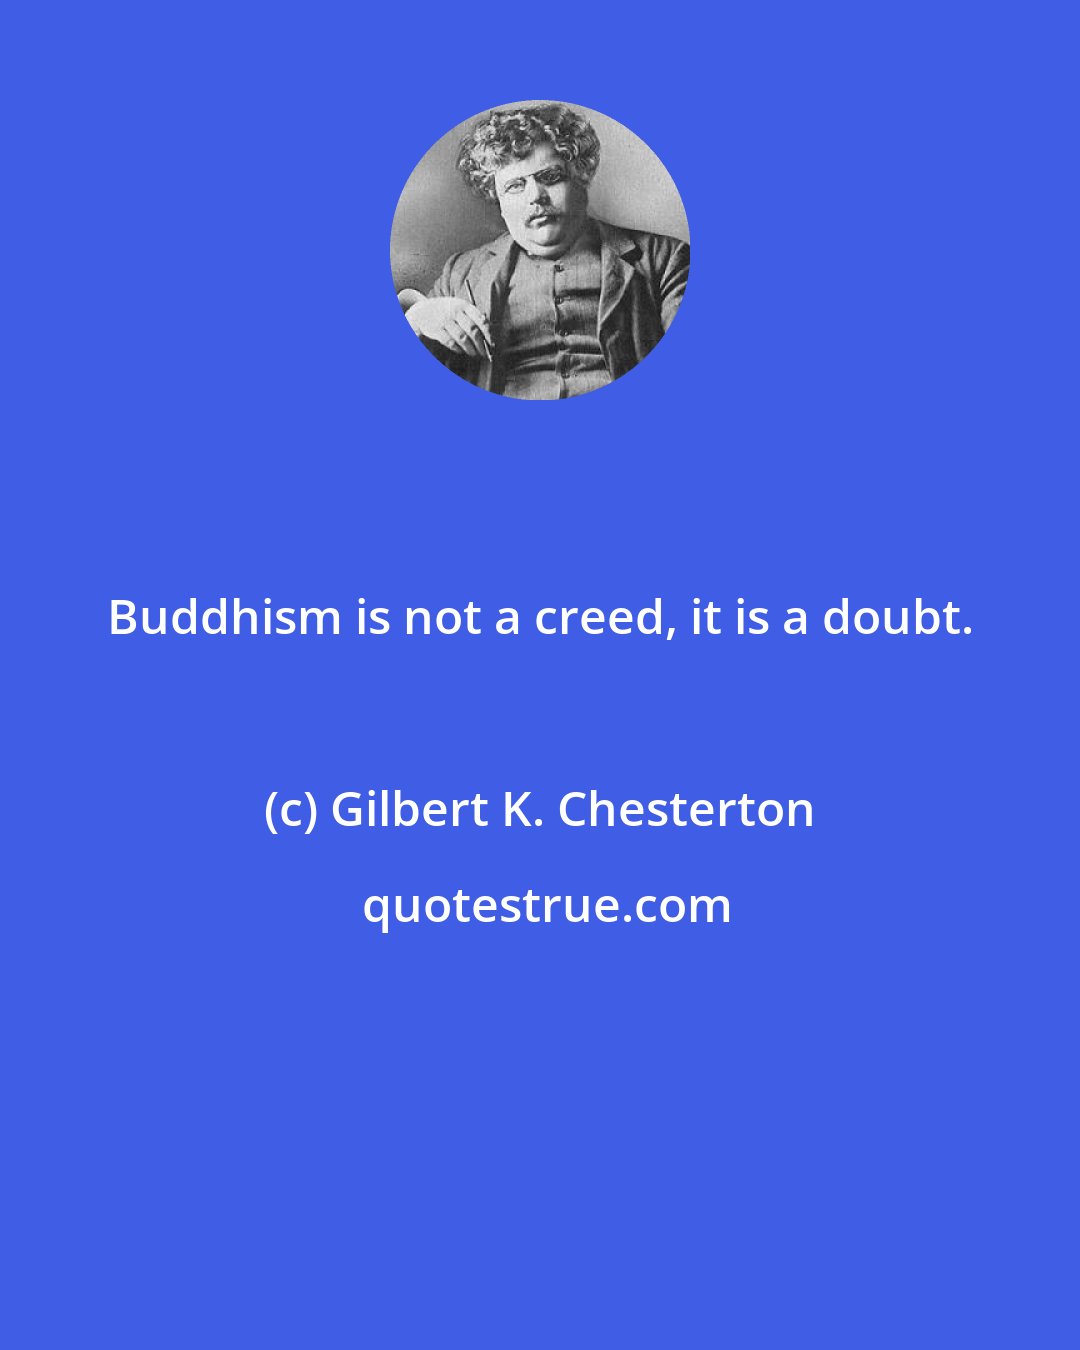 Gilbert K. Chesterton: Buddhism is not a creed, it is a doubt.